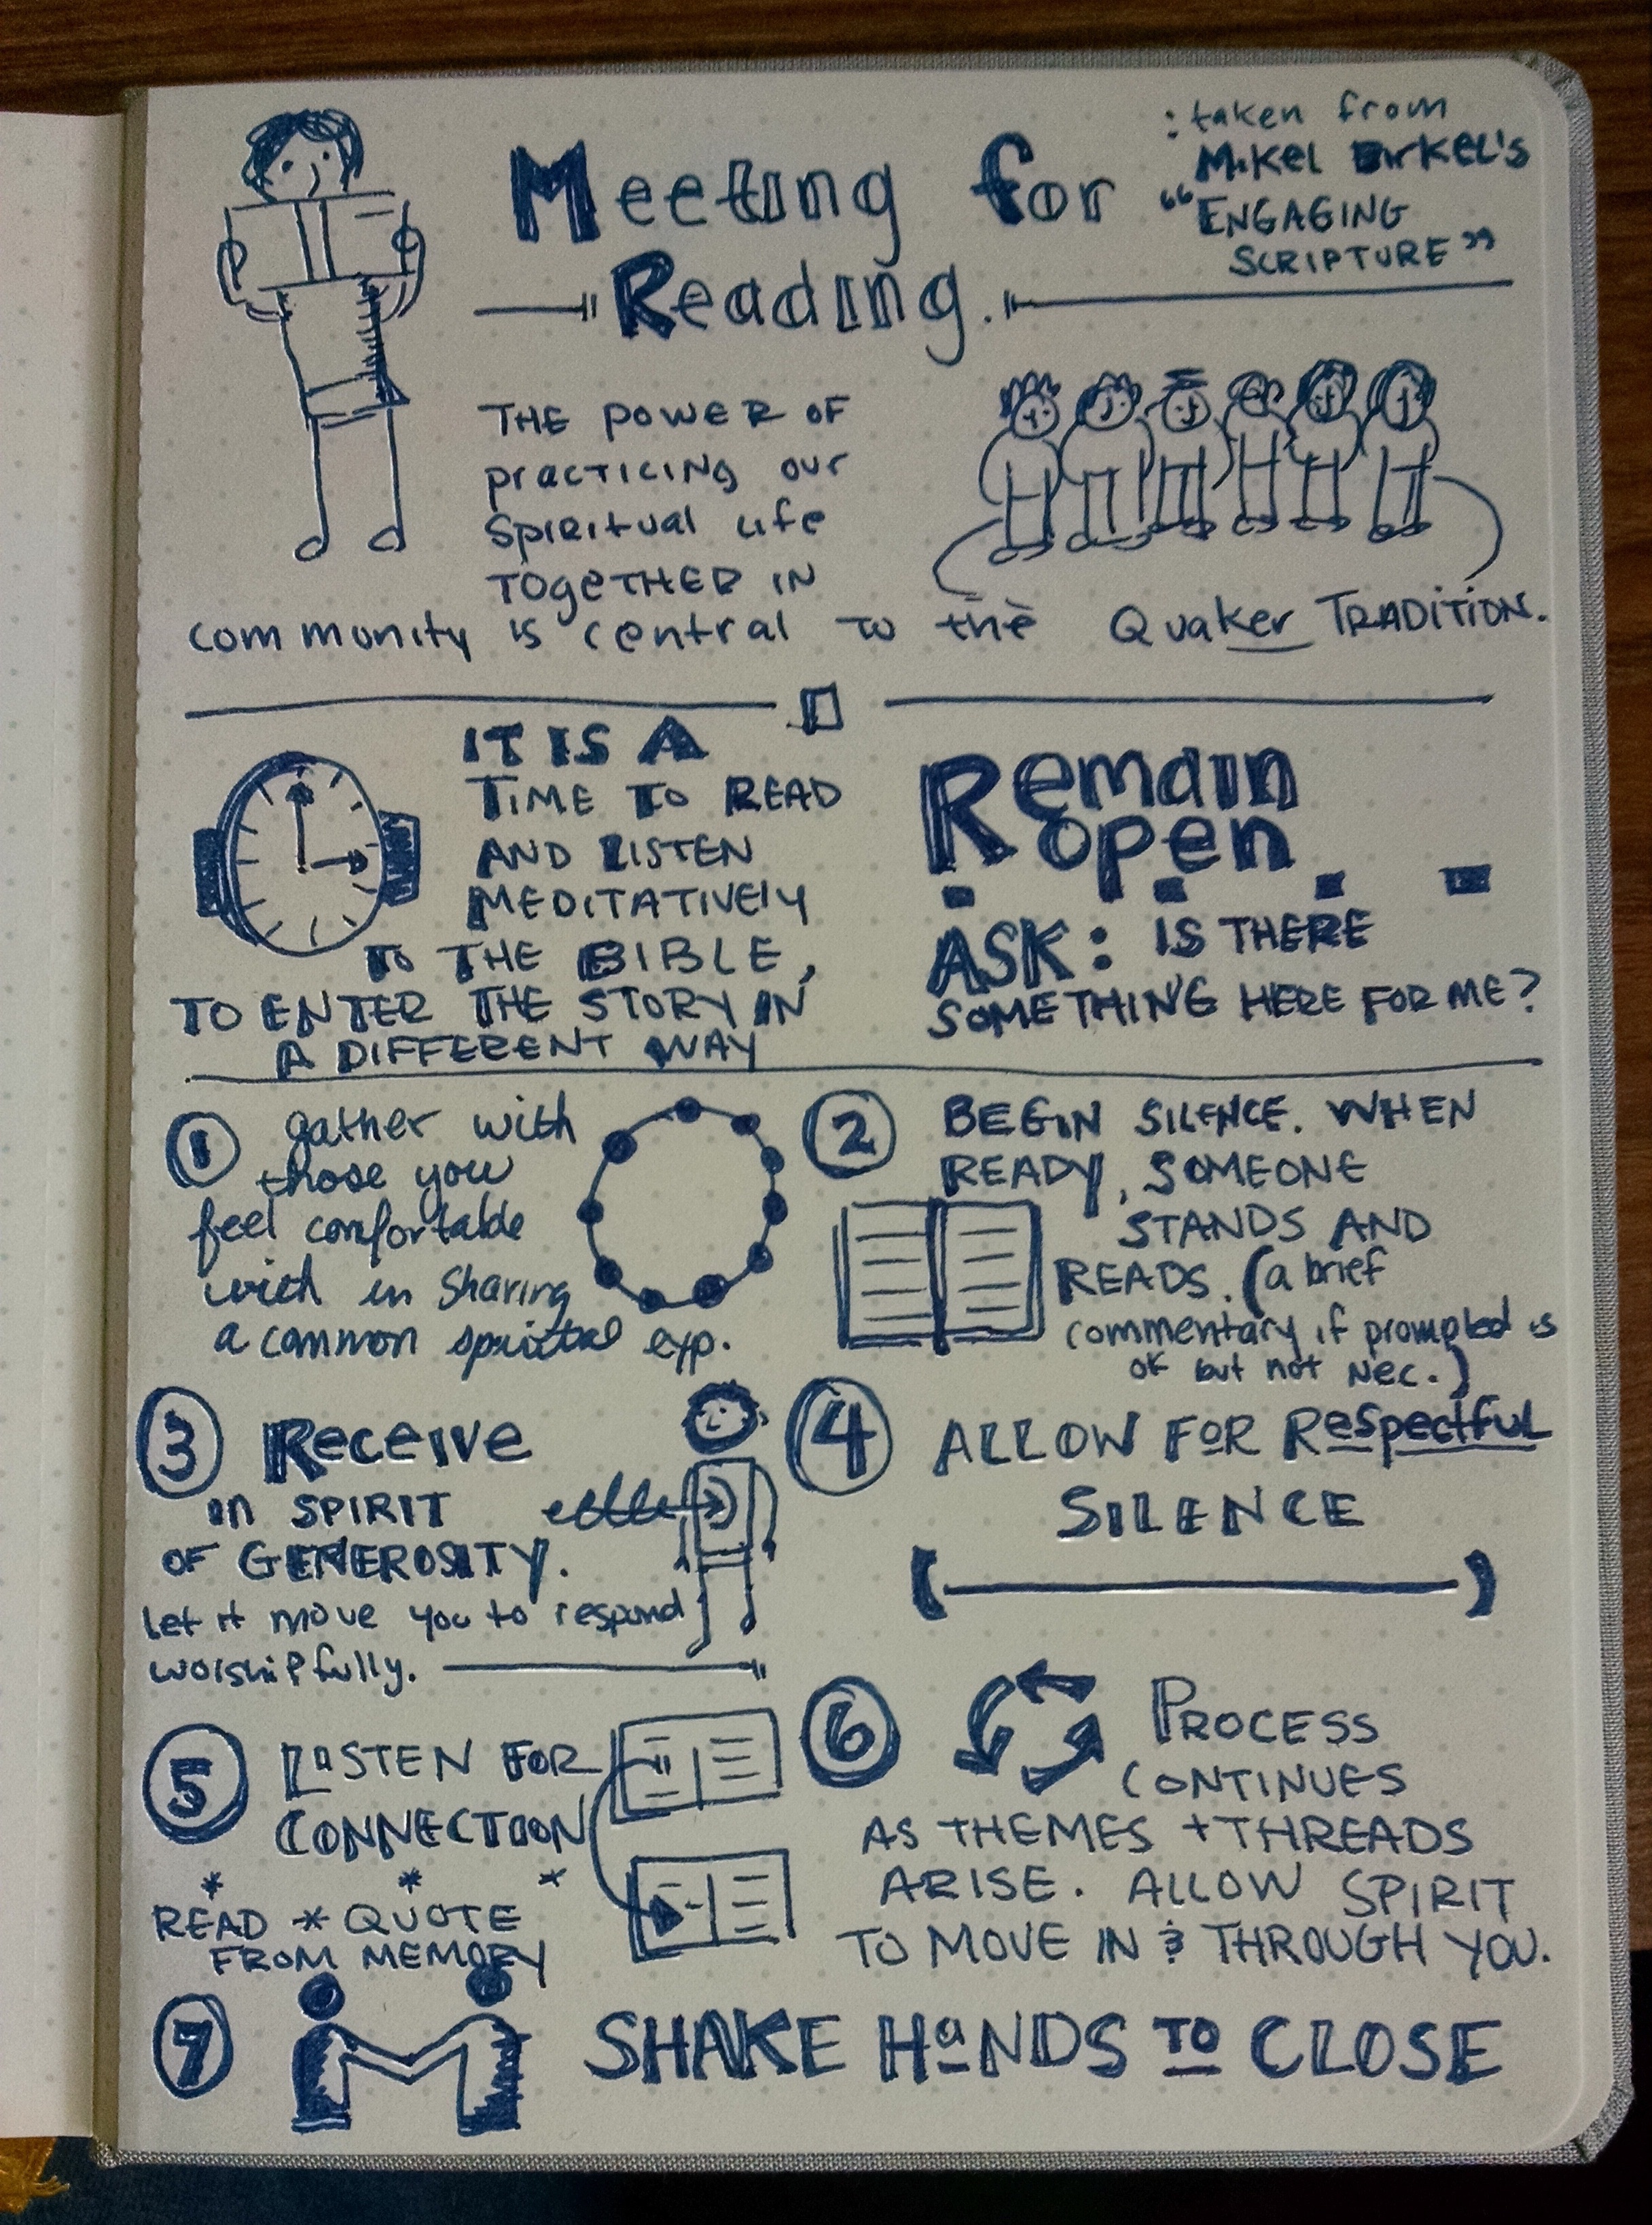 Sketchnotes For Meeting for Reading